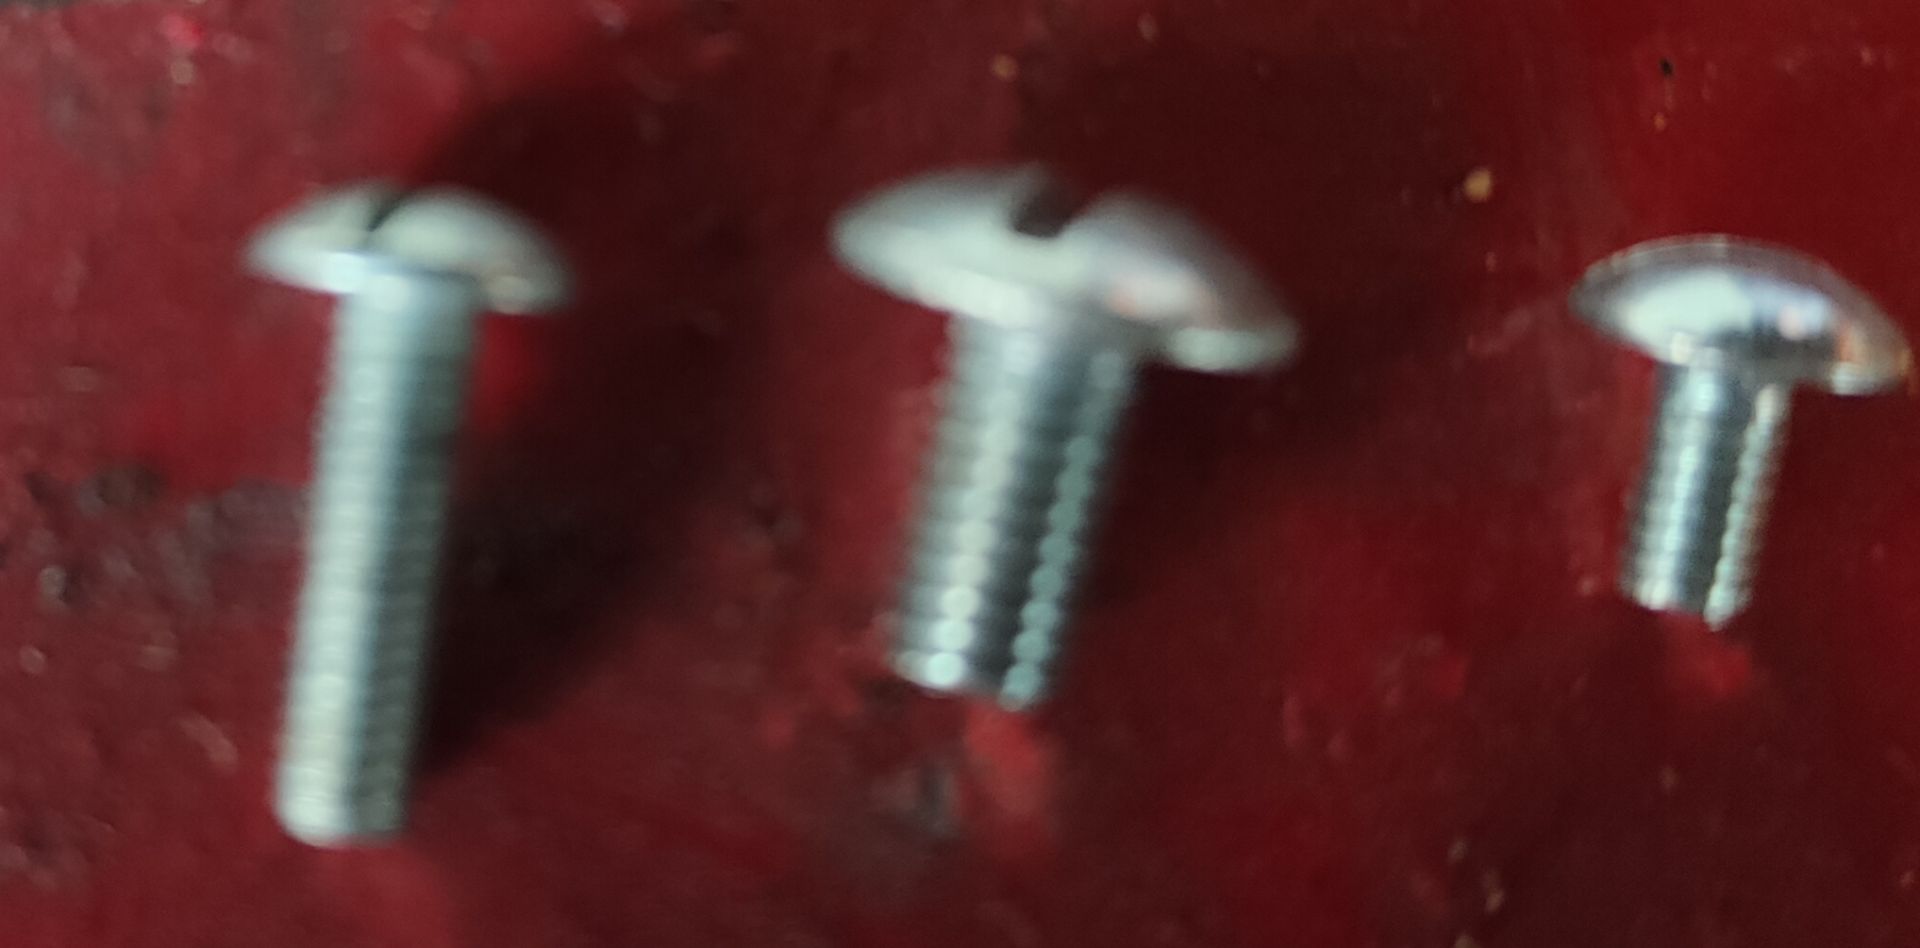 Assorted Flat Head Screws, loading free of charge - yes (vendors comments - functional) Please - Image 3 of 3